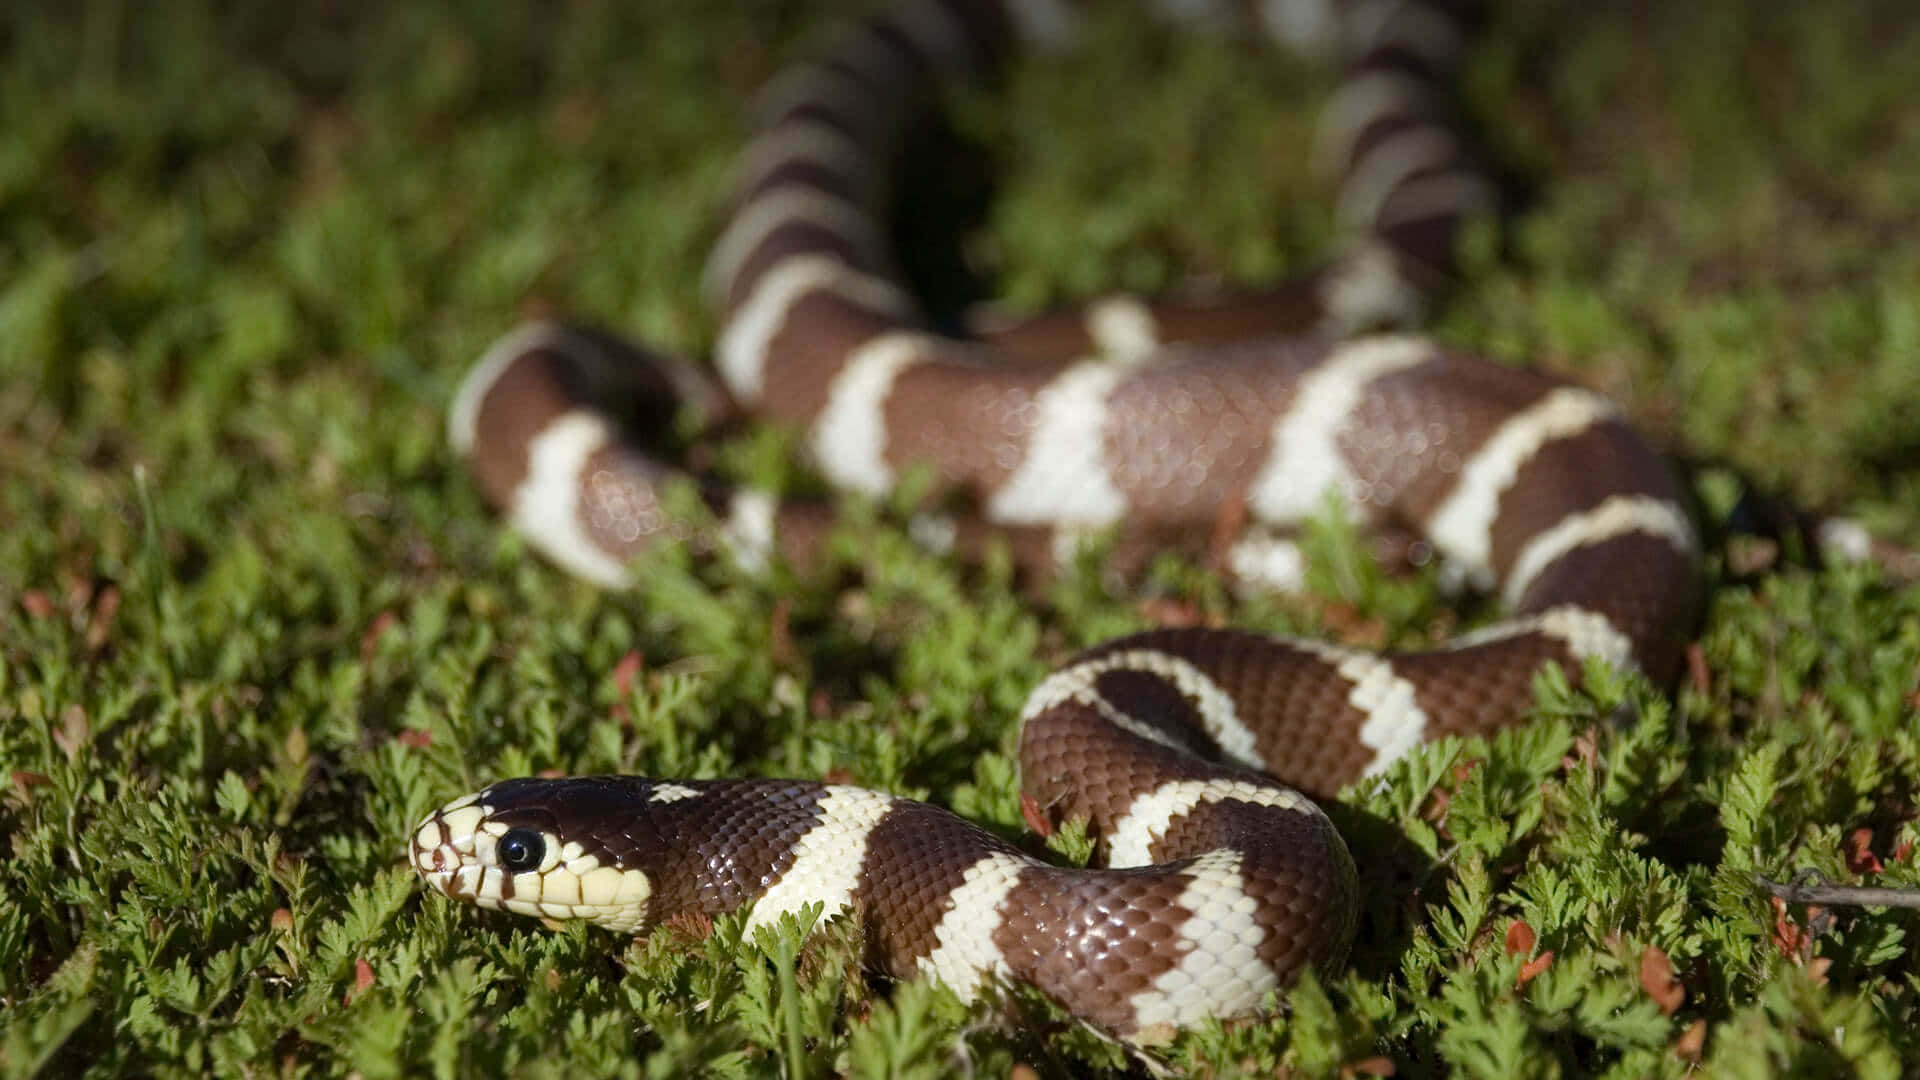 A Colorful King Snake Slithering in the Grass